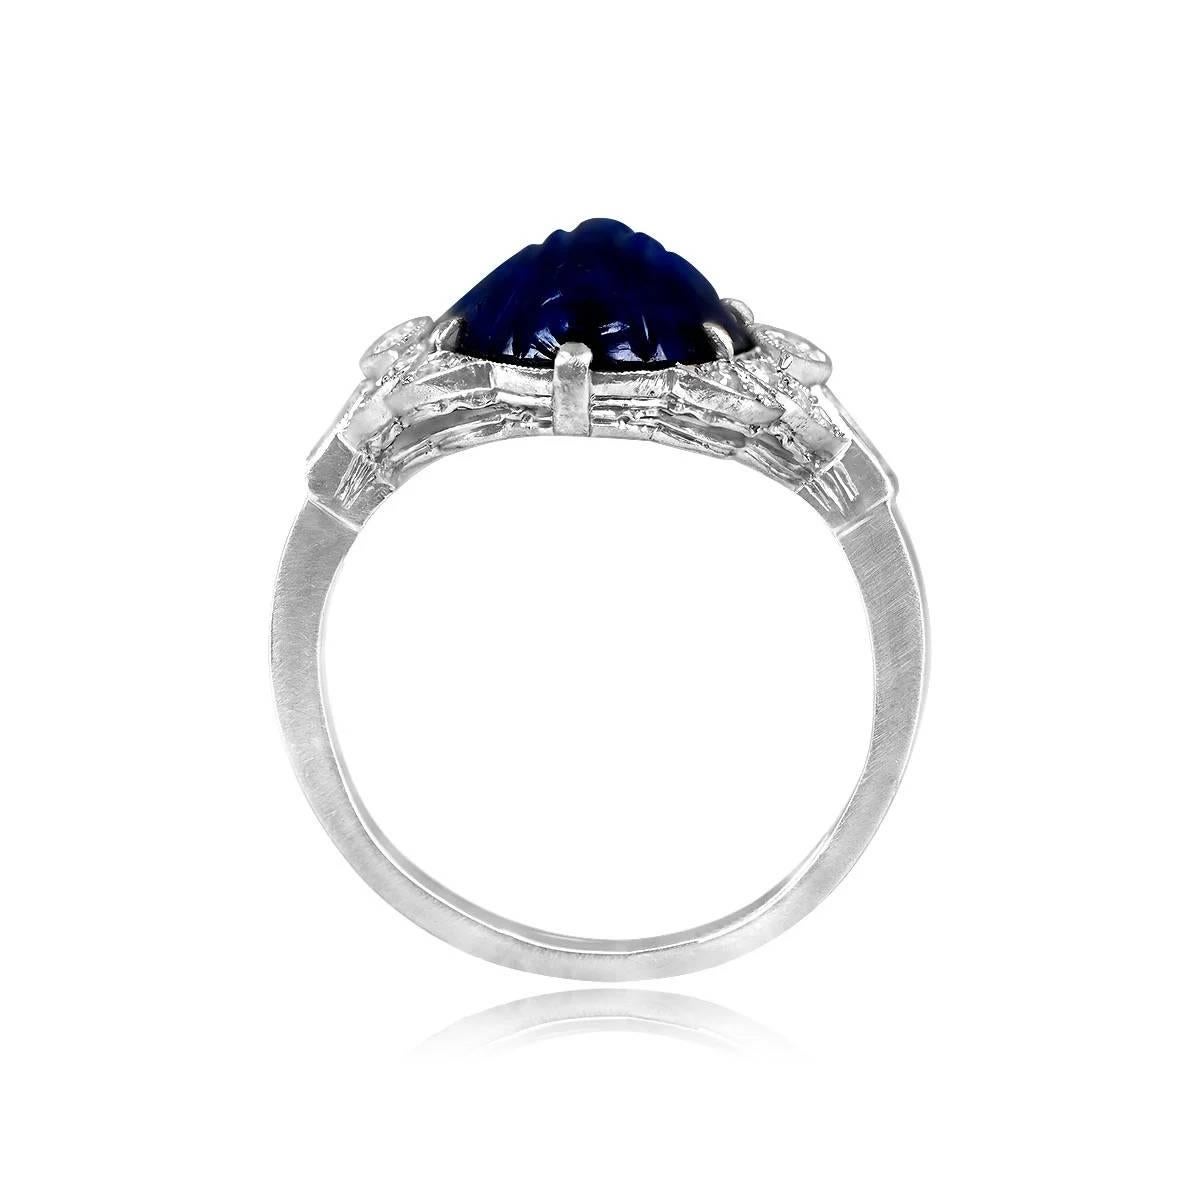 Antique 8.64ct Cabochon Cut Natural Burmese Sapphire Cocktail Ring, Platinum In Excellent Condition For Sale In New York, NY